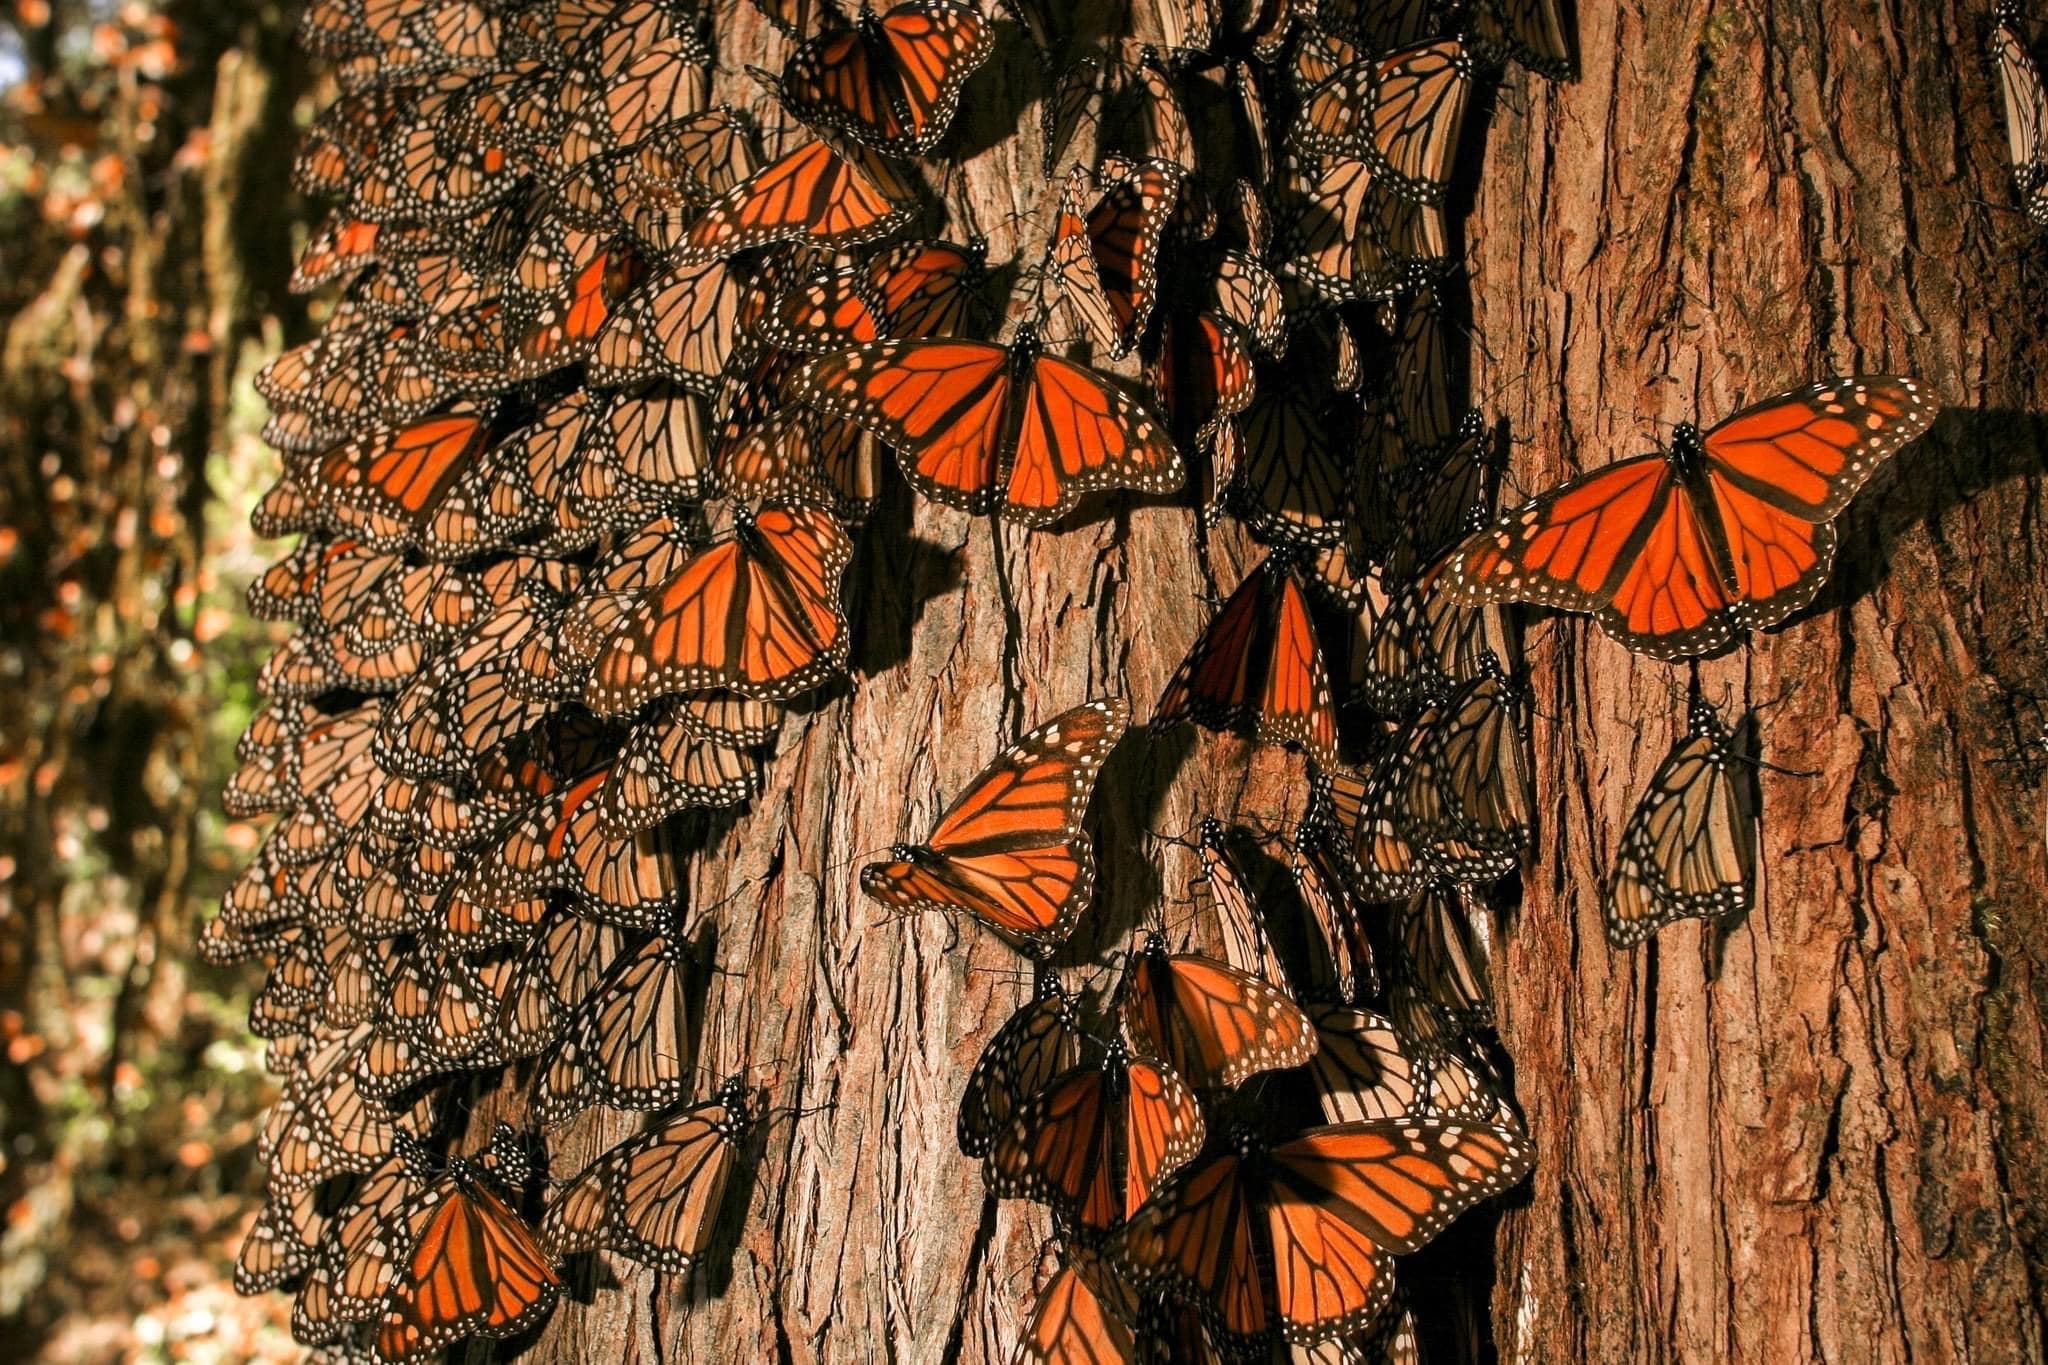 Hundreds of monarch butterflies settling on an oyamela fir tree for warmth in the Monarch Butterfly Biosphere Reserve.